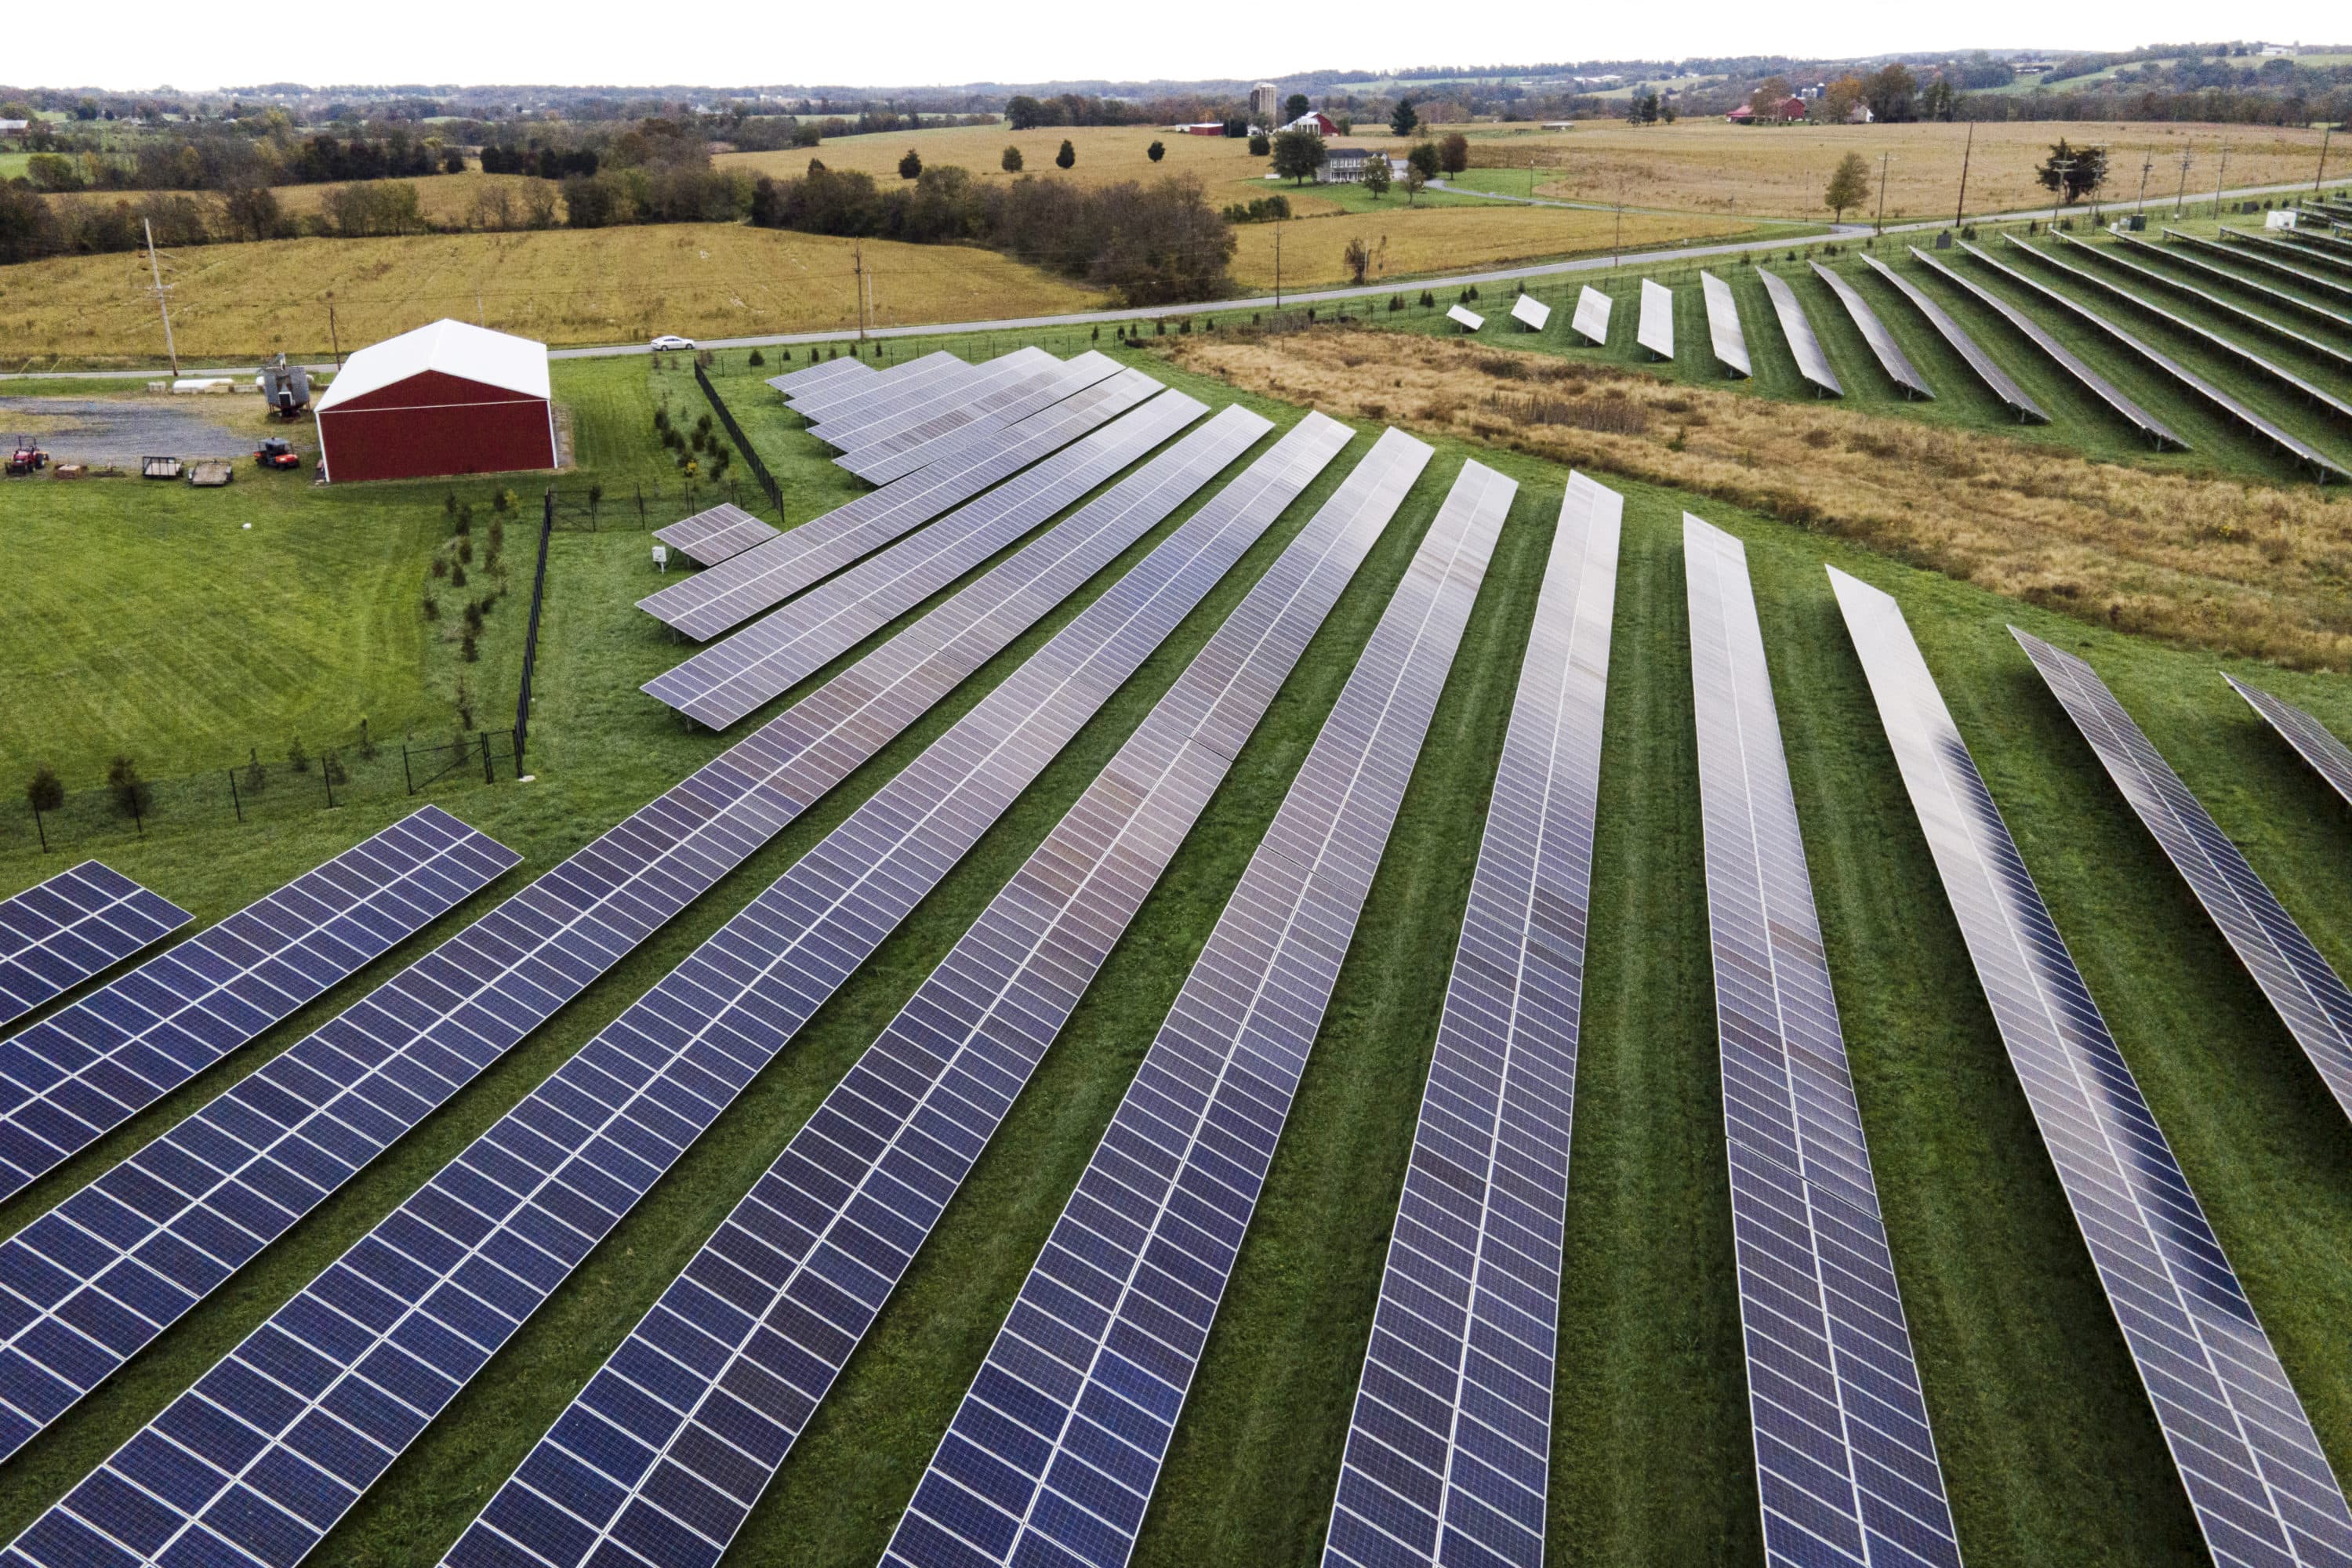 Farmland is seen with solar panels from Cypress Creek Renewables, Oct. 28, 2021, in Thurmont, Maryland. (Julio Cortez/AP)